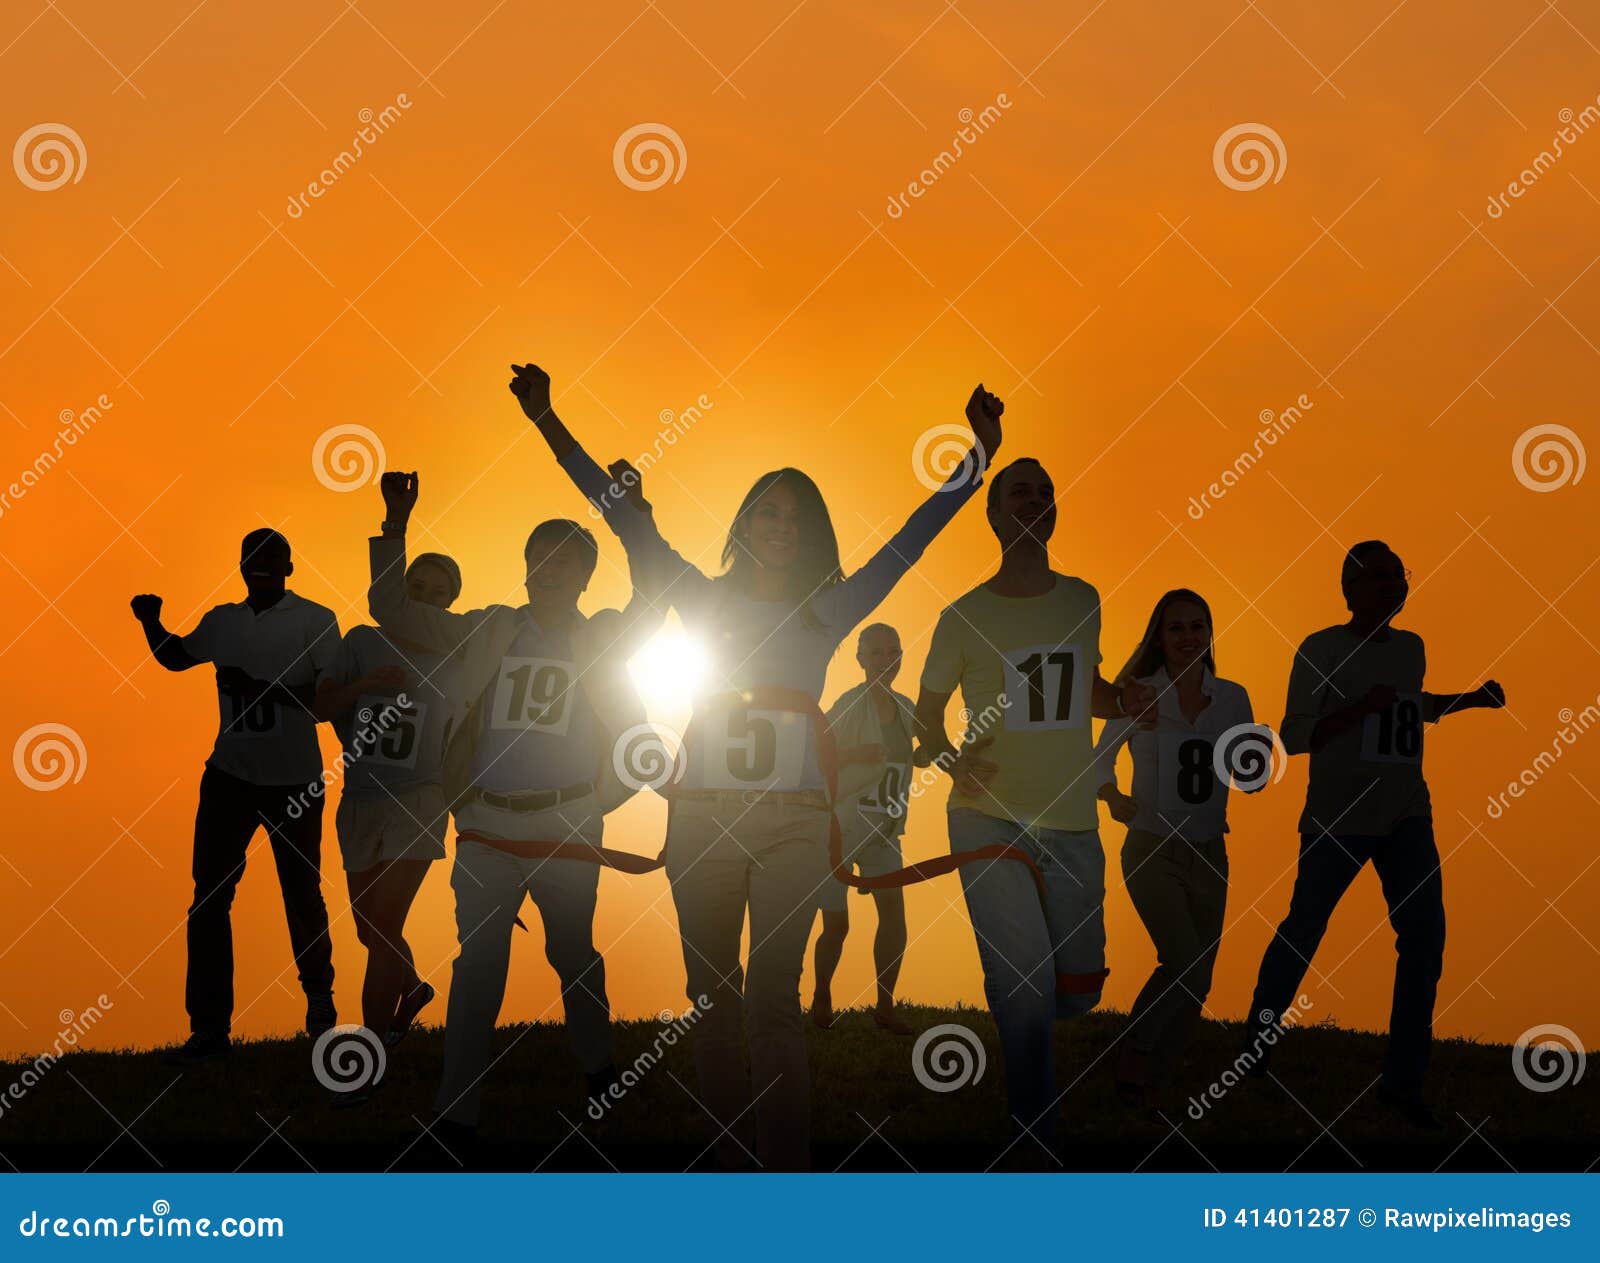 silhouettes of business people winning concept